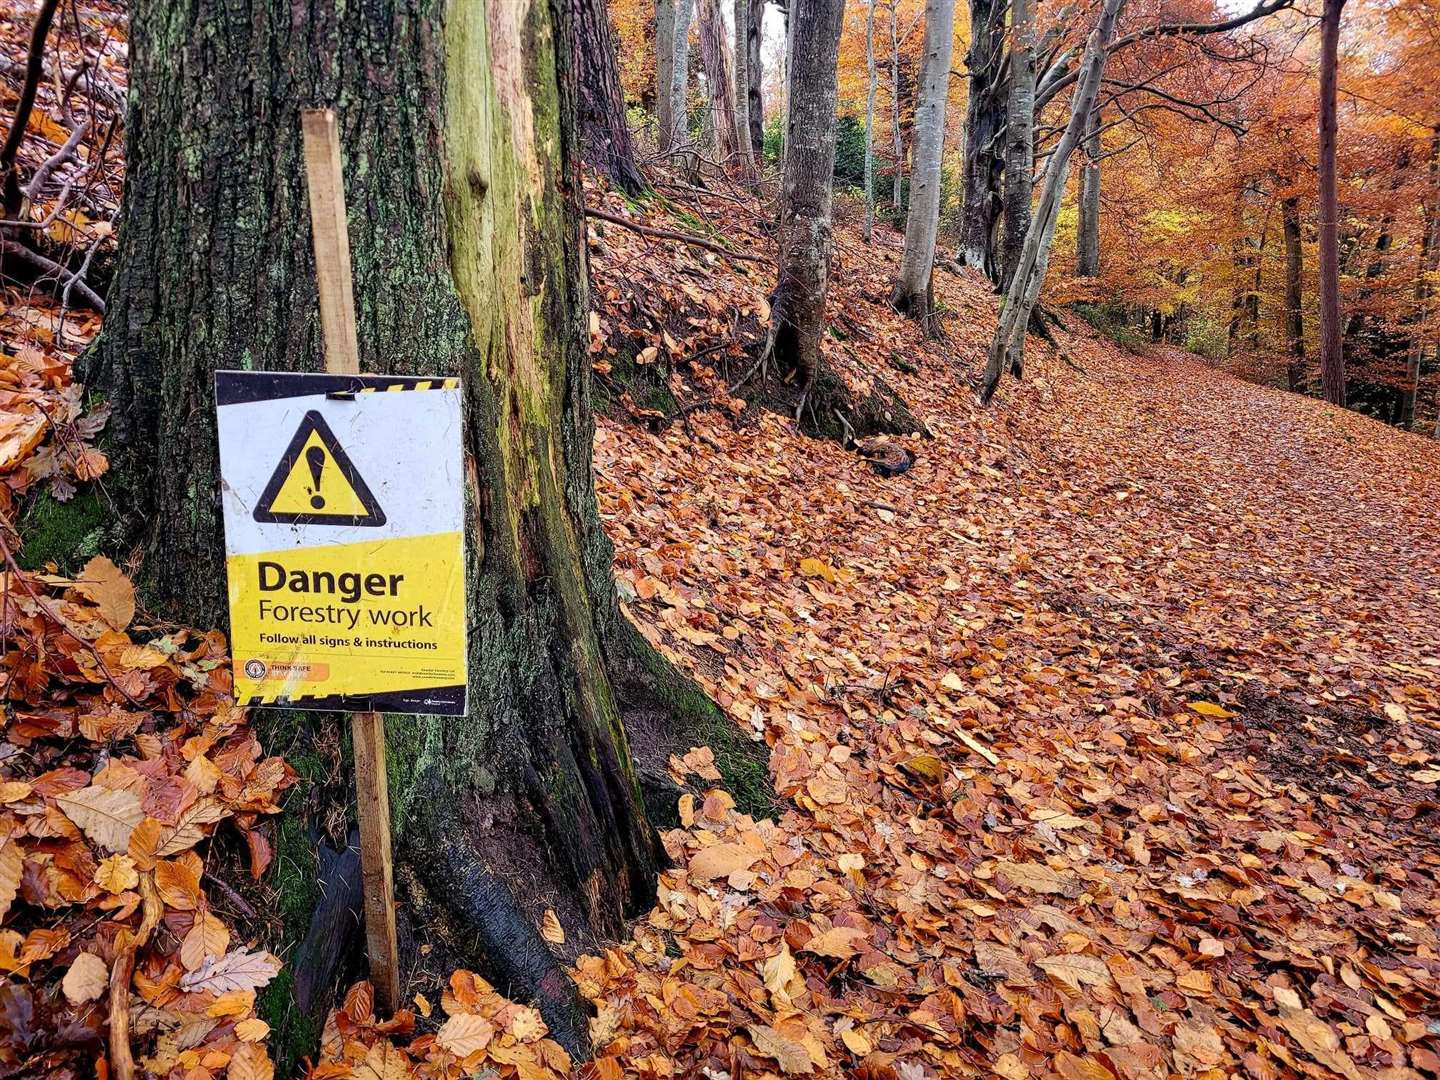 Chainsaws could be heard for a few days while the work was carried out at Cluny Hill.